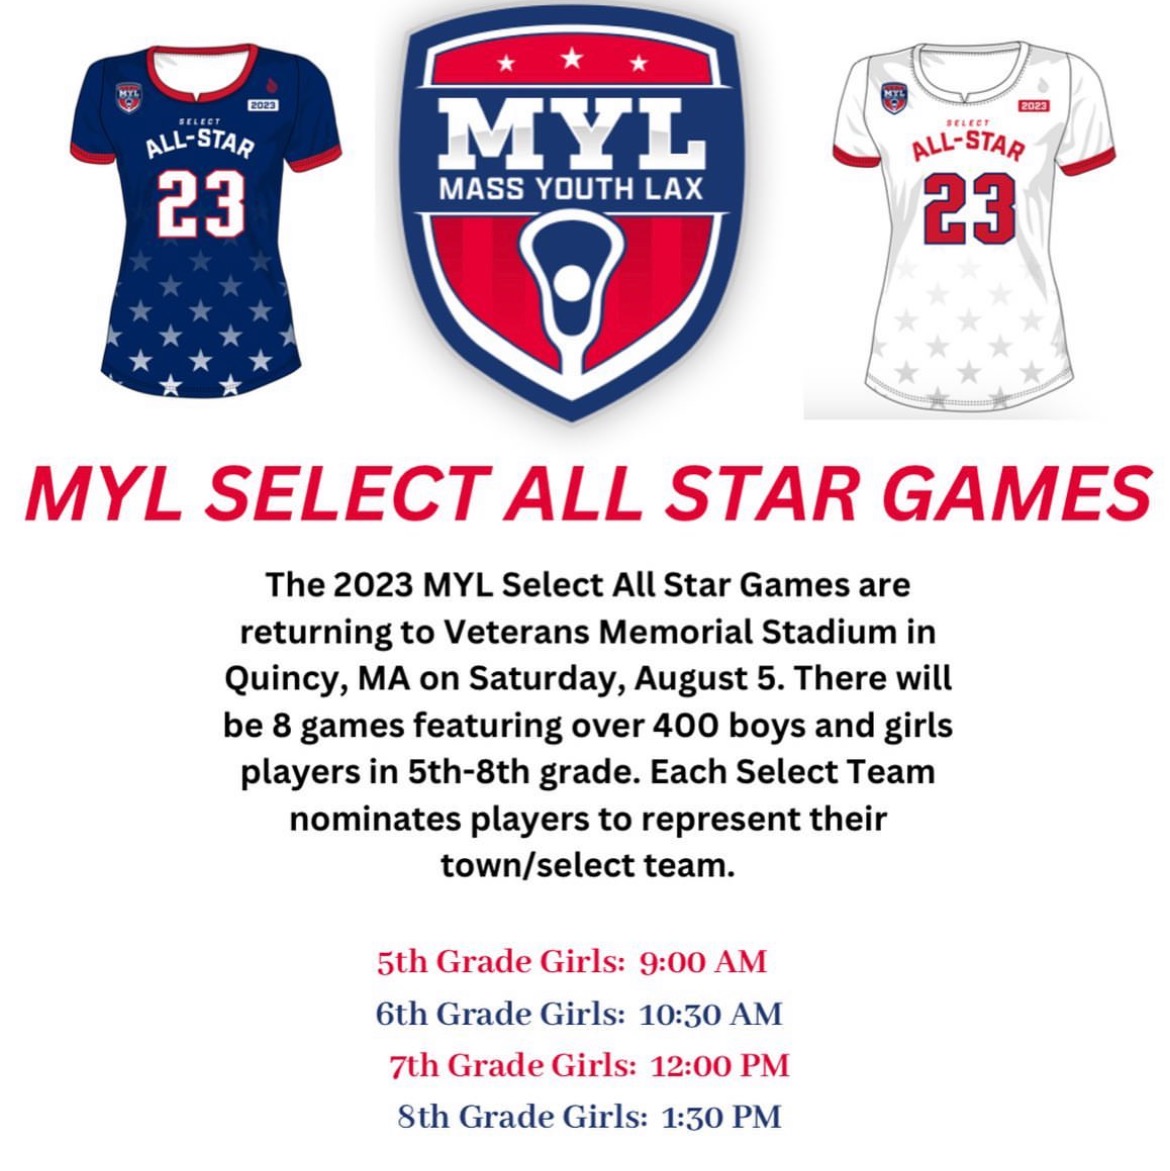 MYL SELECT ALL STAR GAMES